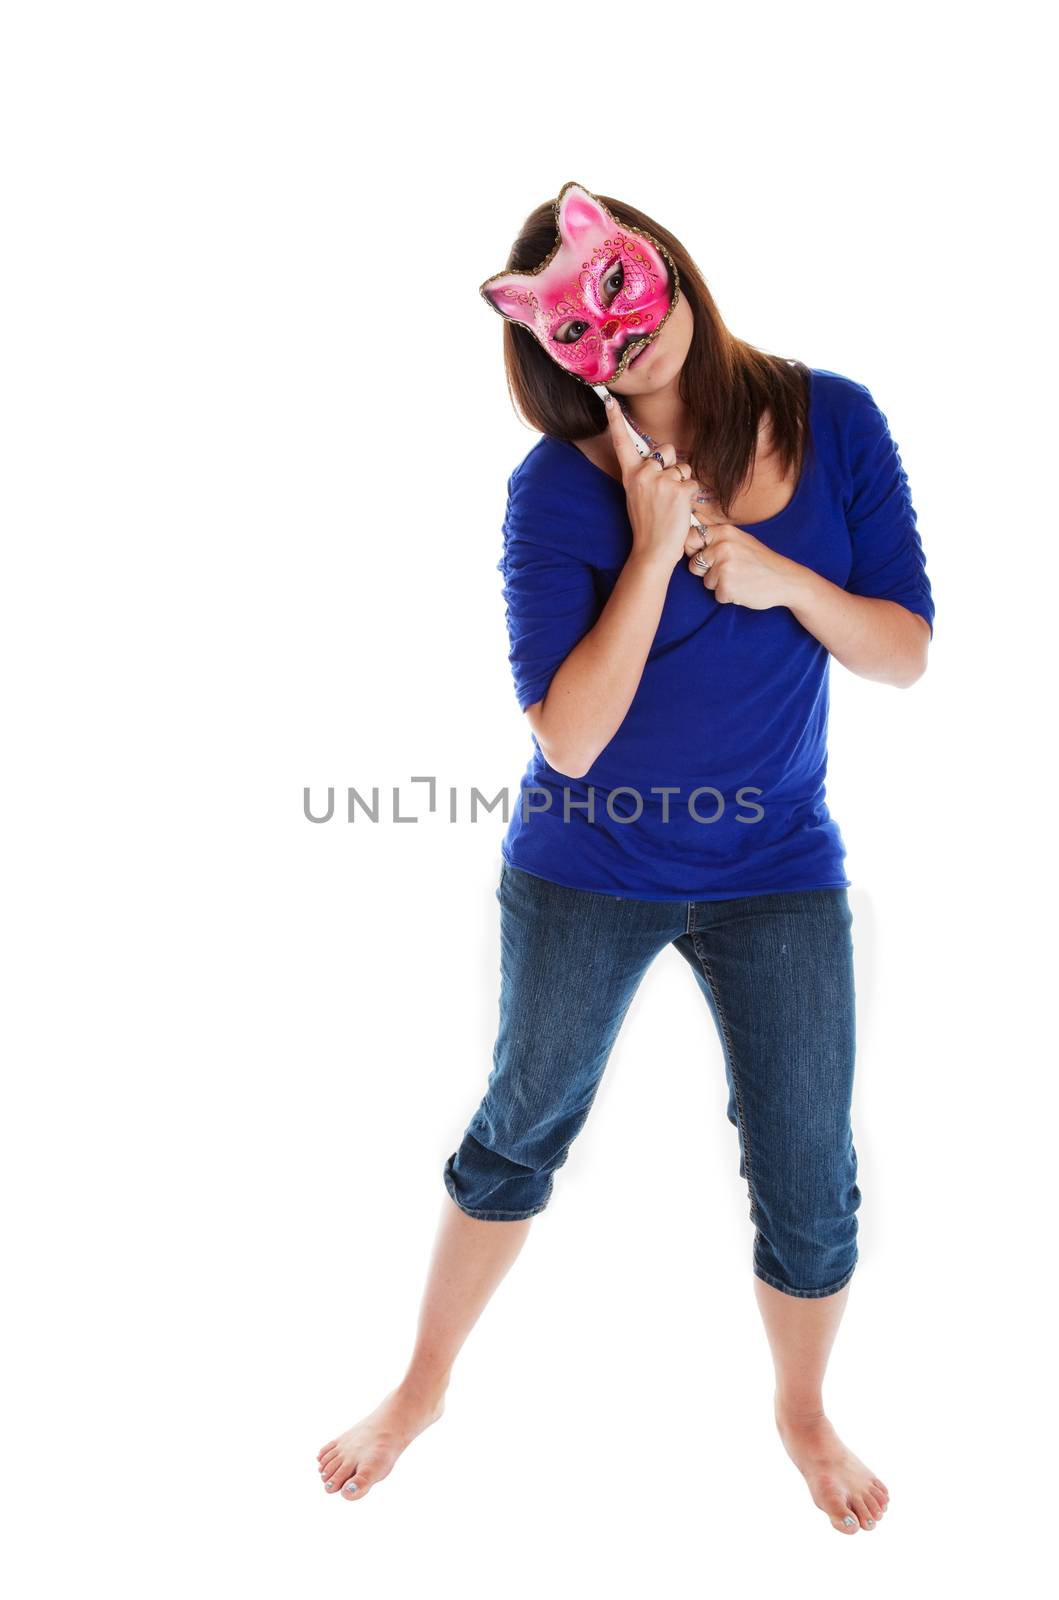 Theatrical performer with hand held Venetian mask.  Shot on white background.